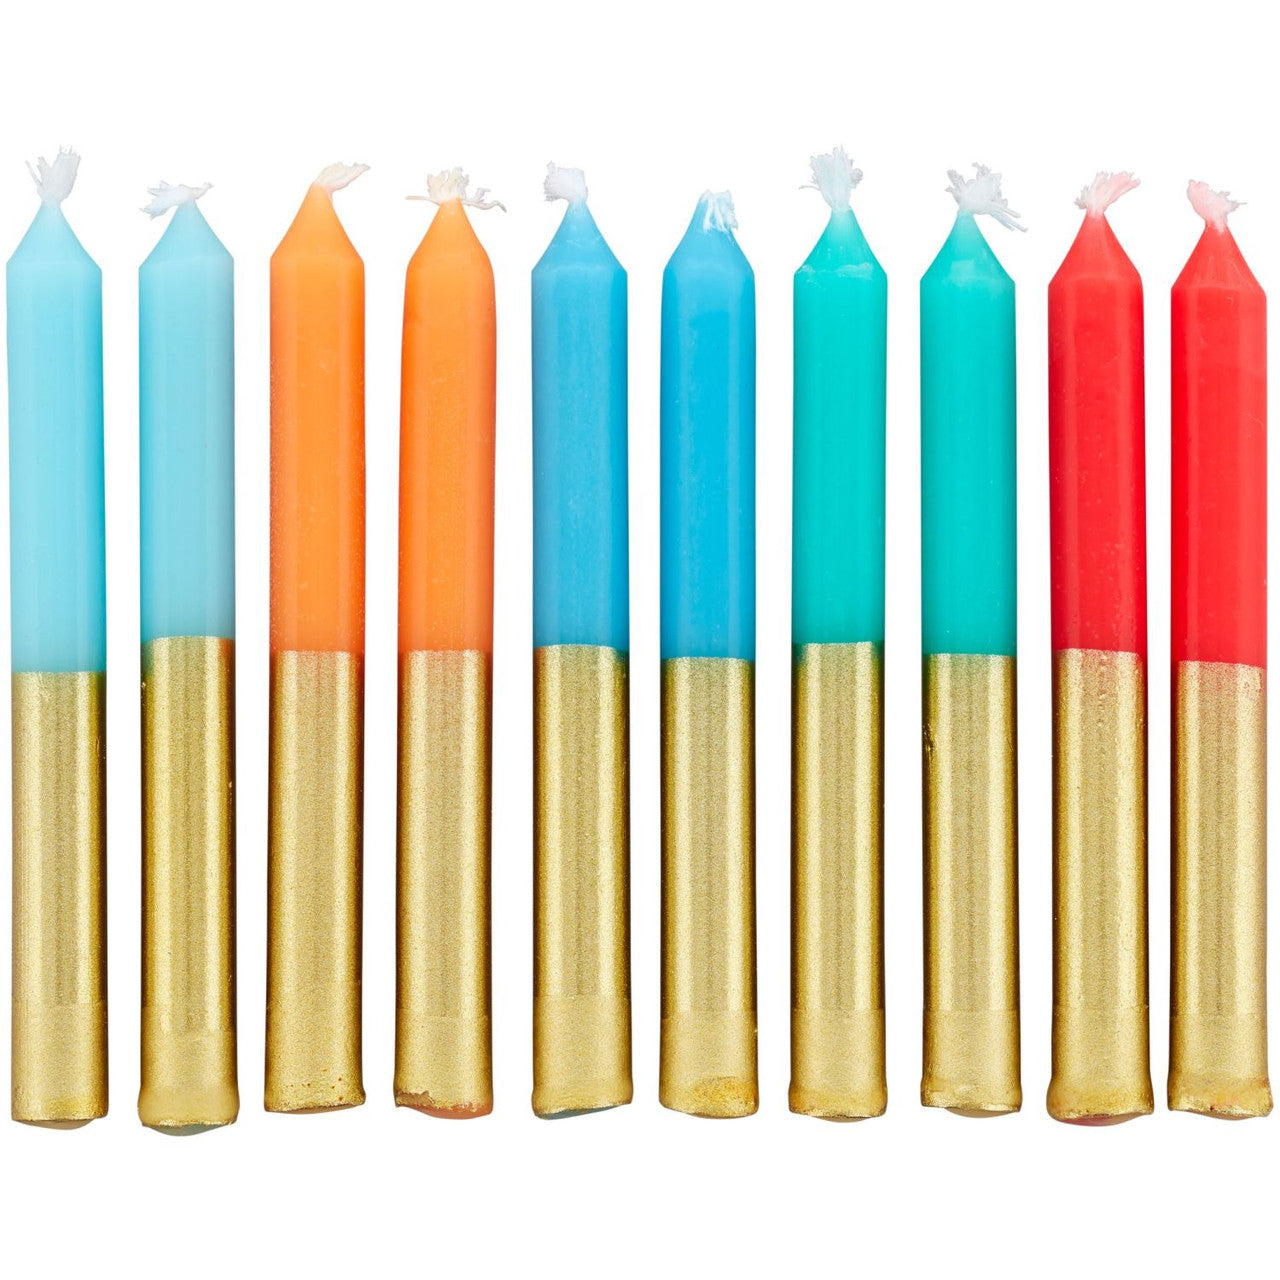 Blue, Orange & Red Gold-Dipped Birthday Candles, 10-Count